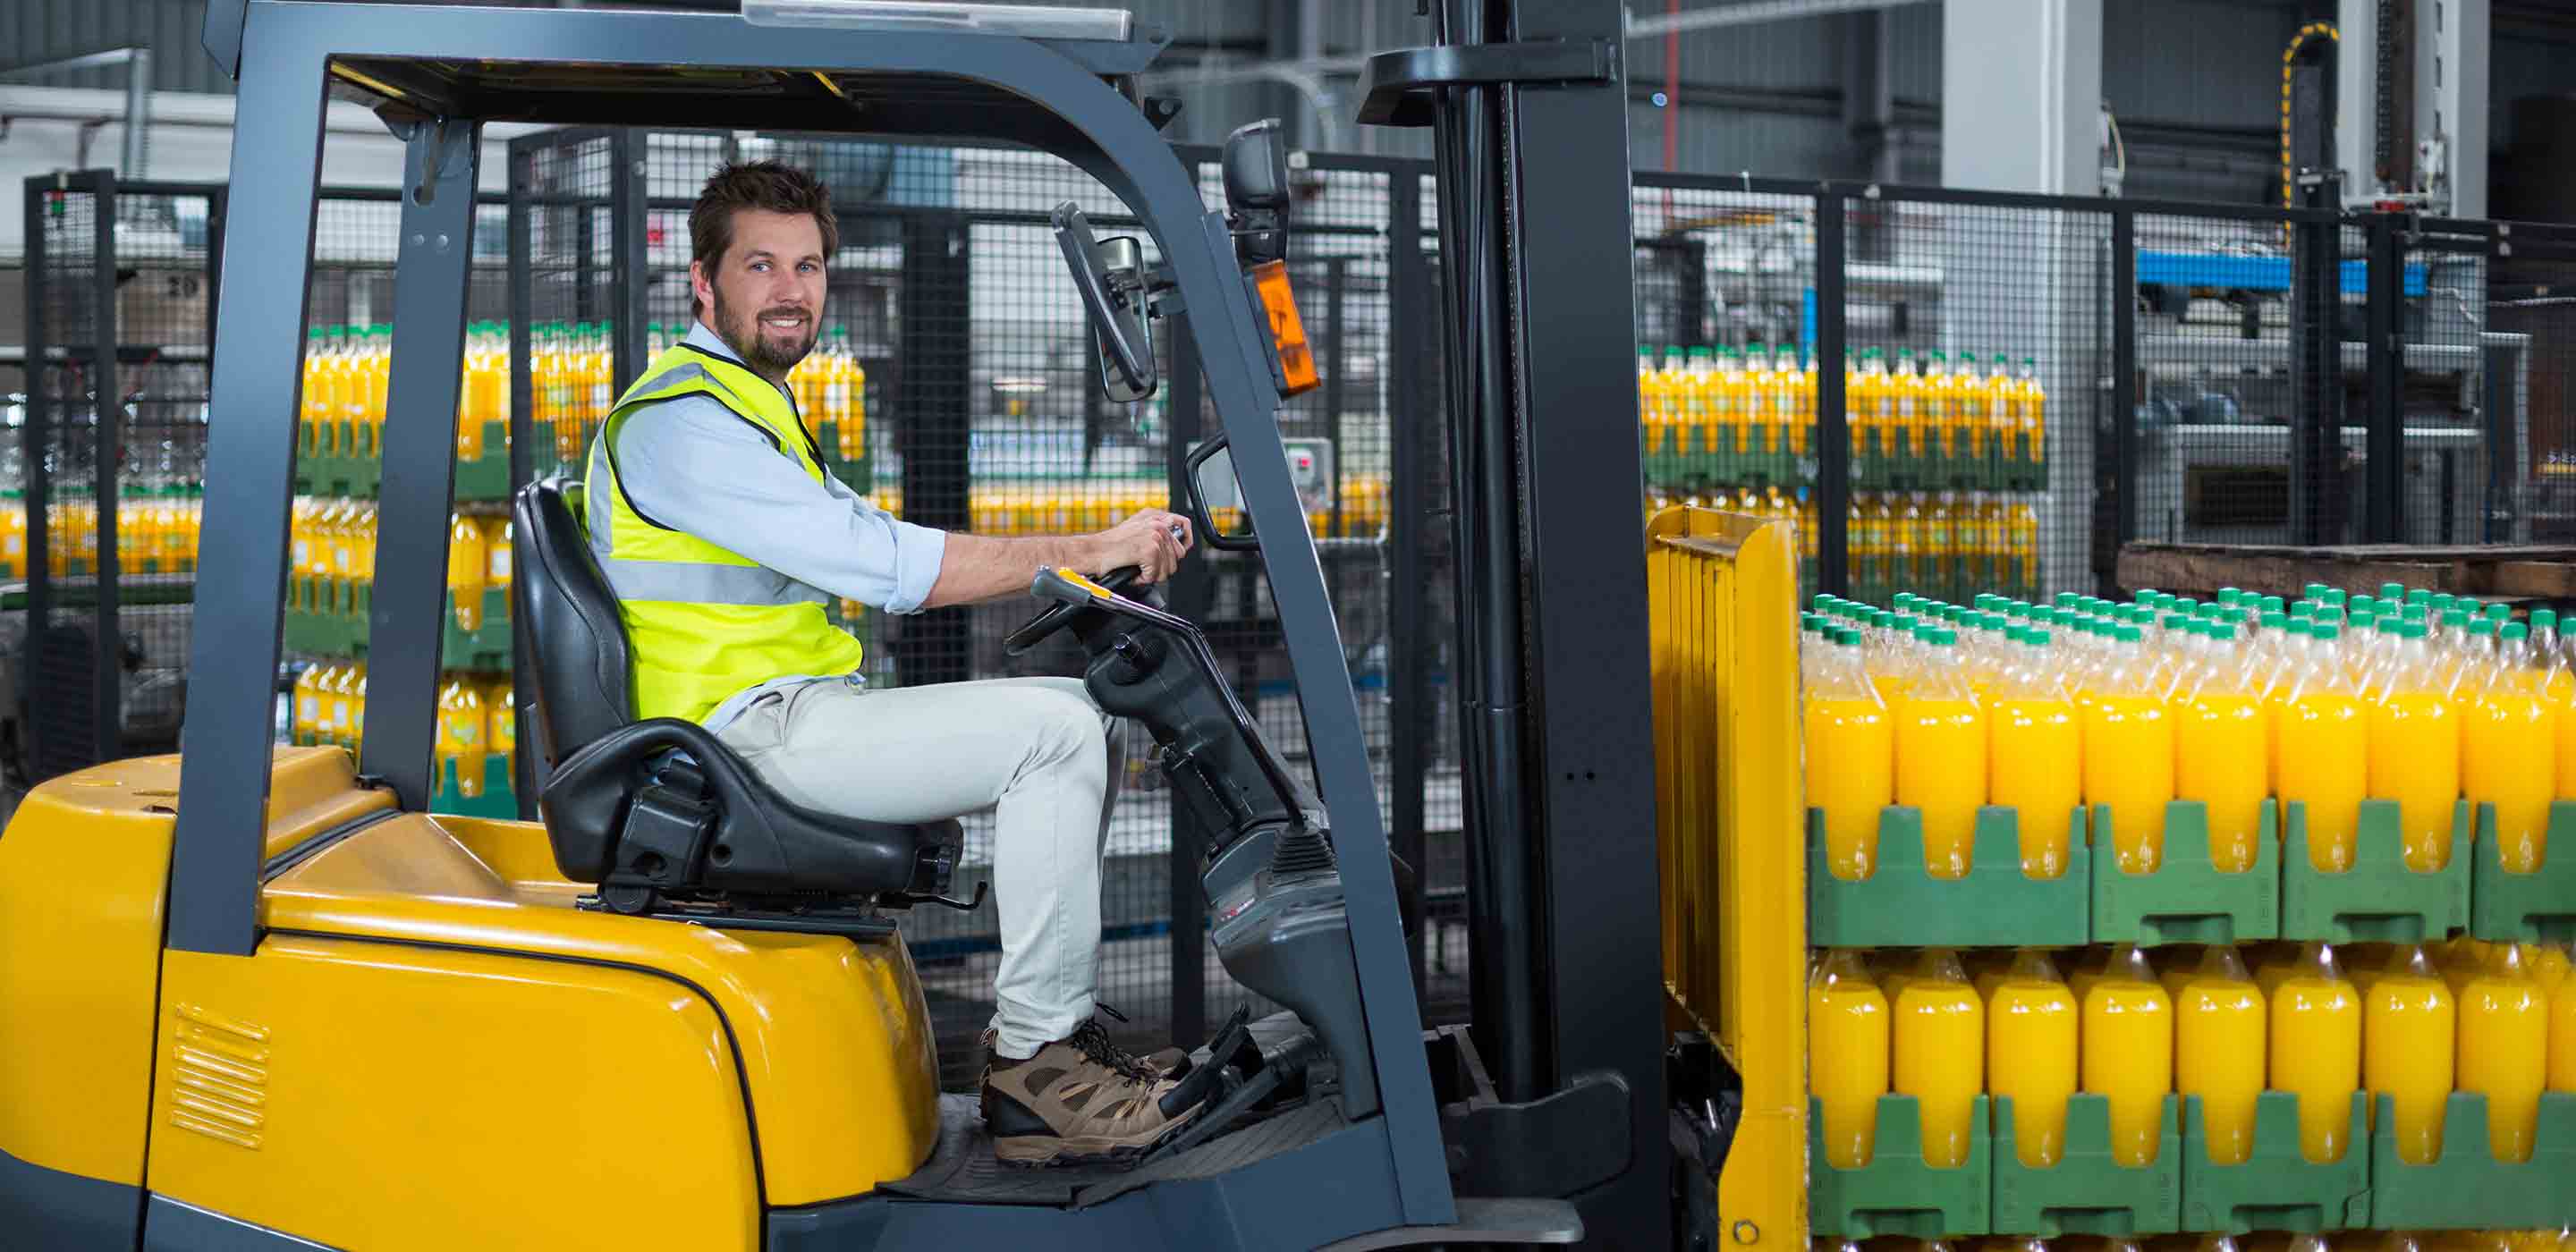 Man driving a forklift in a storage area